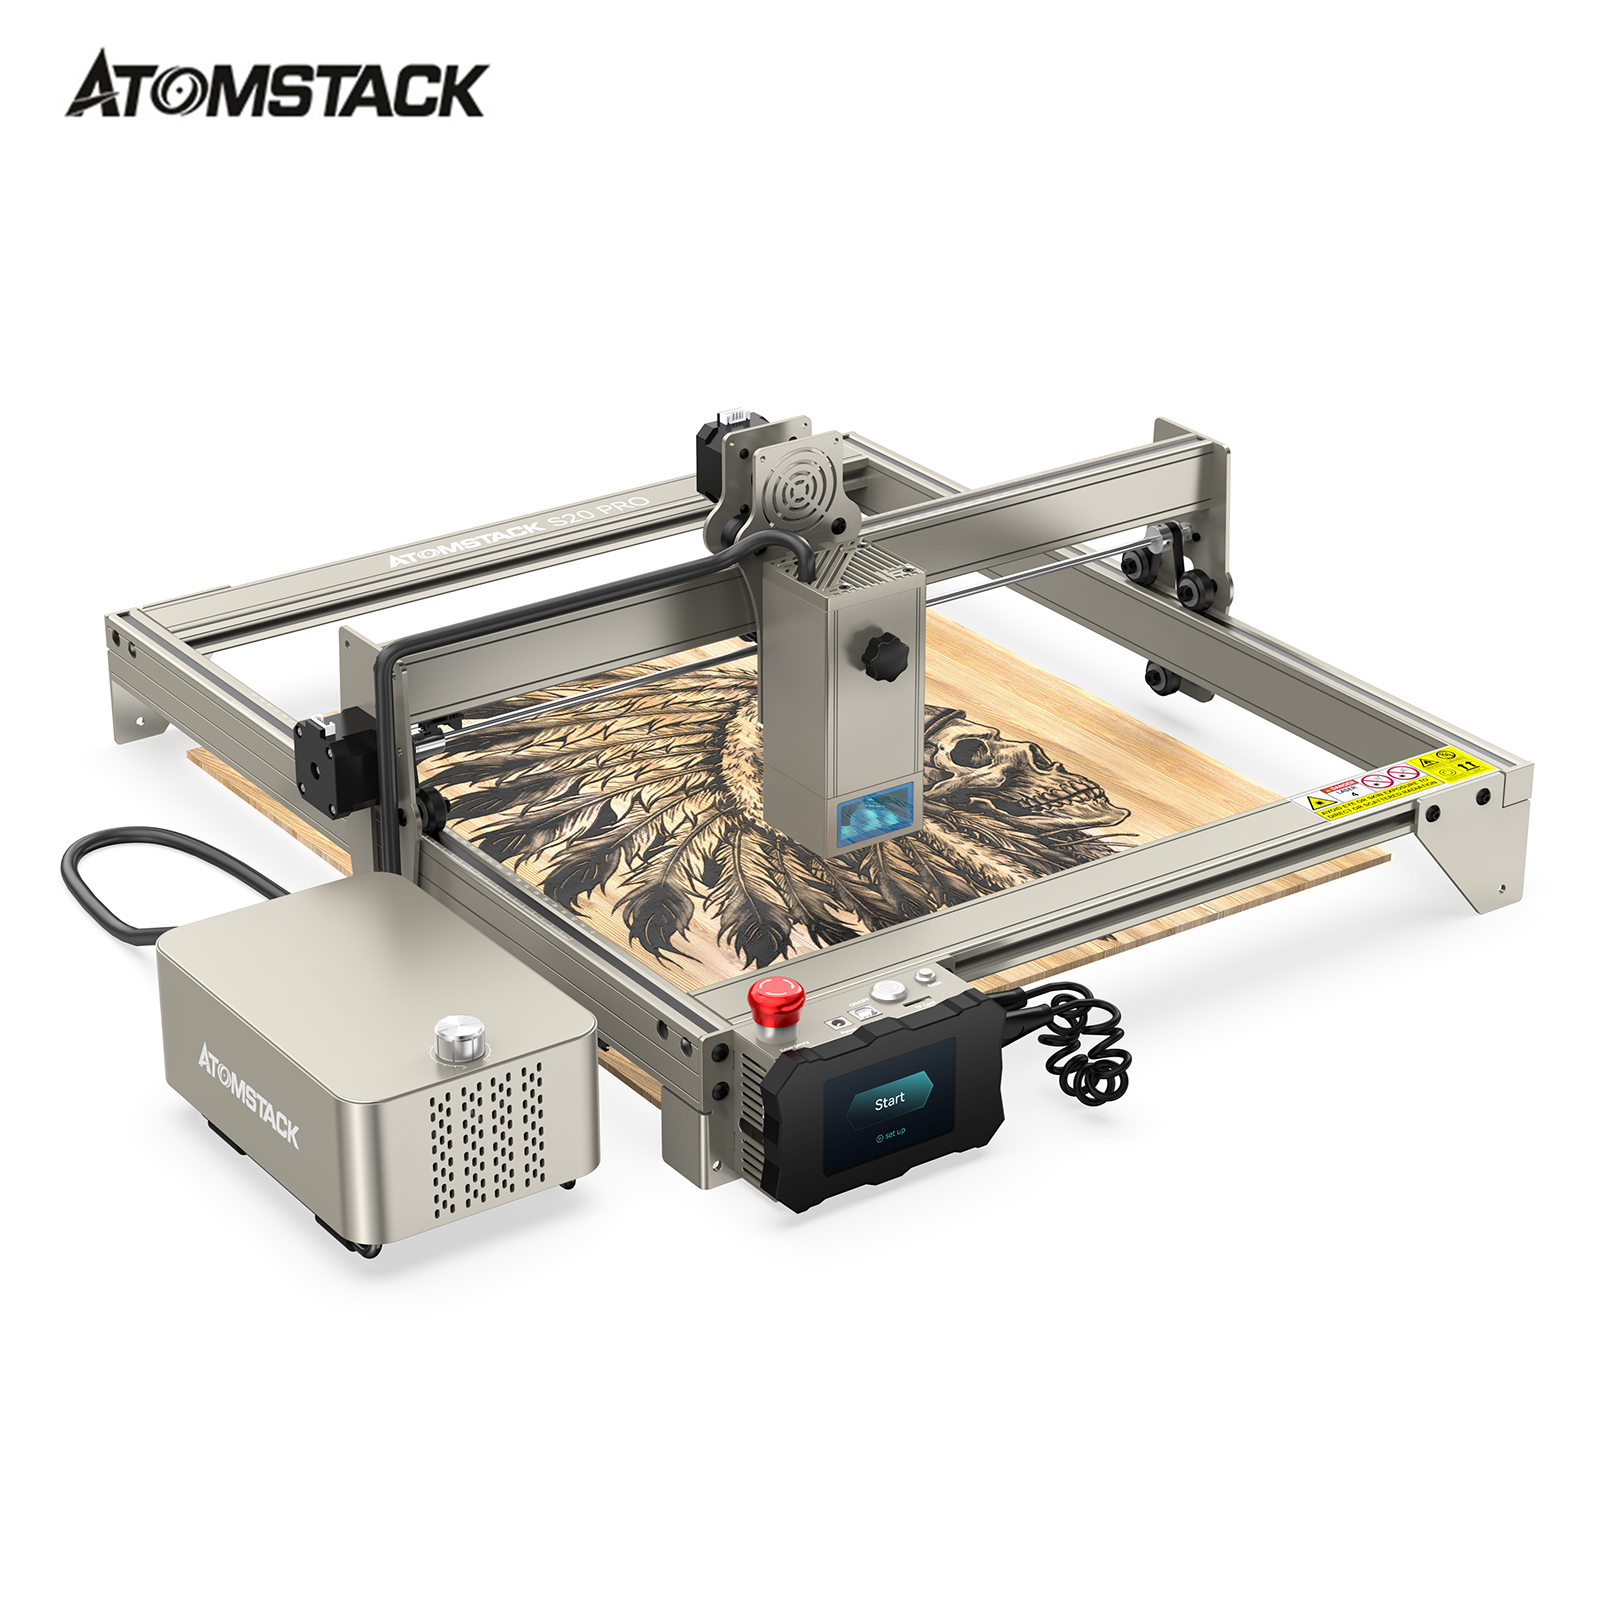 ATOMSTACK S20 Pro Laser Engraving Cutting Machine 20W Laser Power 400x400mm Fixed-Focus Ultra-thin Laser High-Energy Support 12-15mm Solid Wood Board Quick Assembly Aluminum Alloy Structure for Wood Metal 304 Stainless Steel Engraving